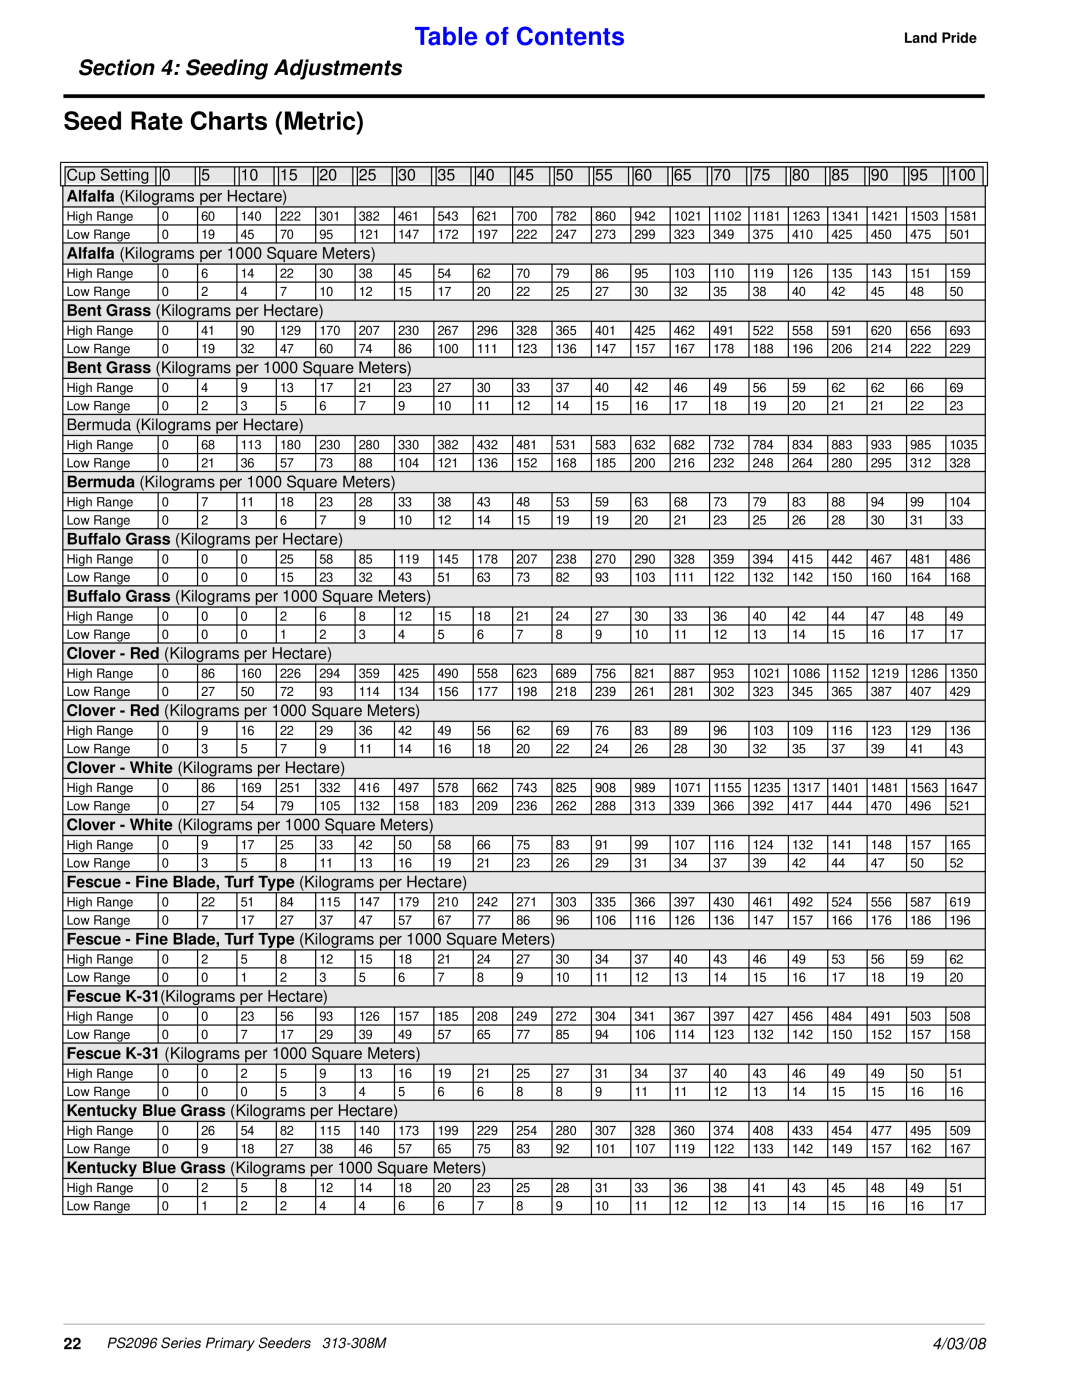 Land Pride 313-308M manual Seed Rate Charts Metric, Table of Contents, Seeding Adjustments, 4/03/08 